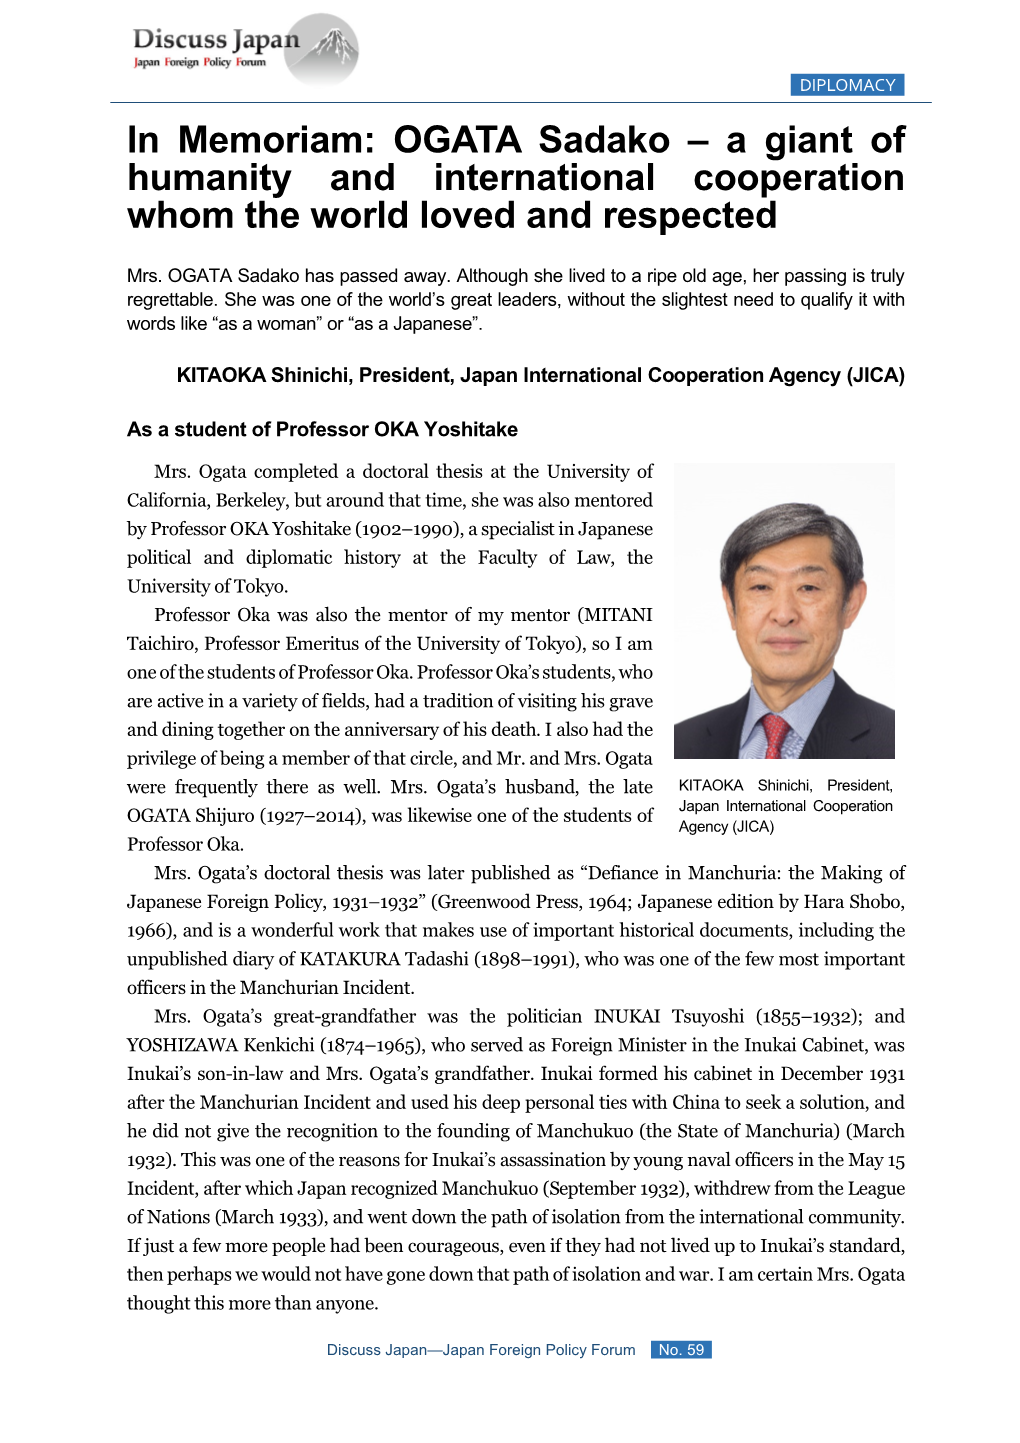 OGATA Sadako – a Giant of Humanity and International Cooperation Whom the World Loved and Respected